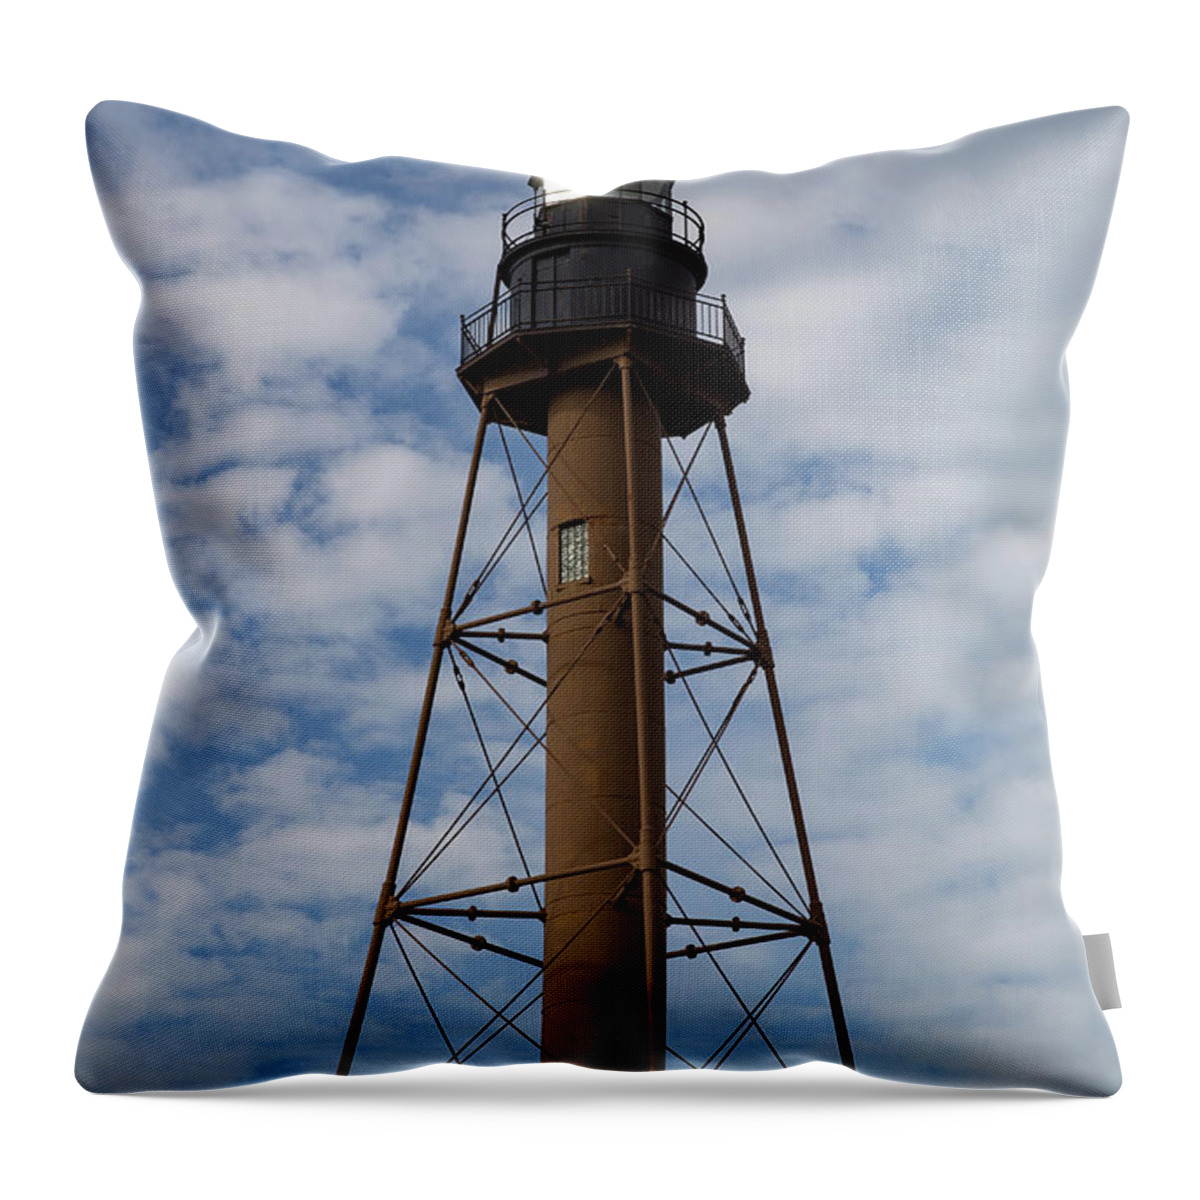 Marblehead Throw Pillow featuring the photograph Marblehead Lighthouse by Denise Kopko